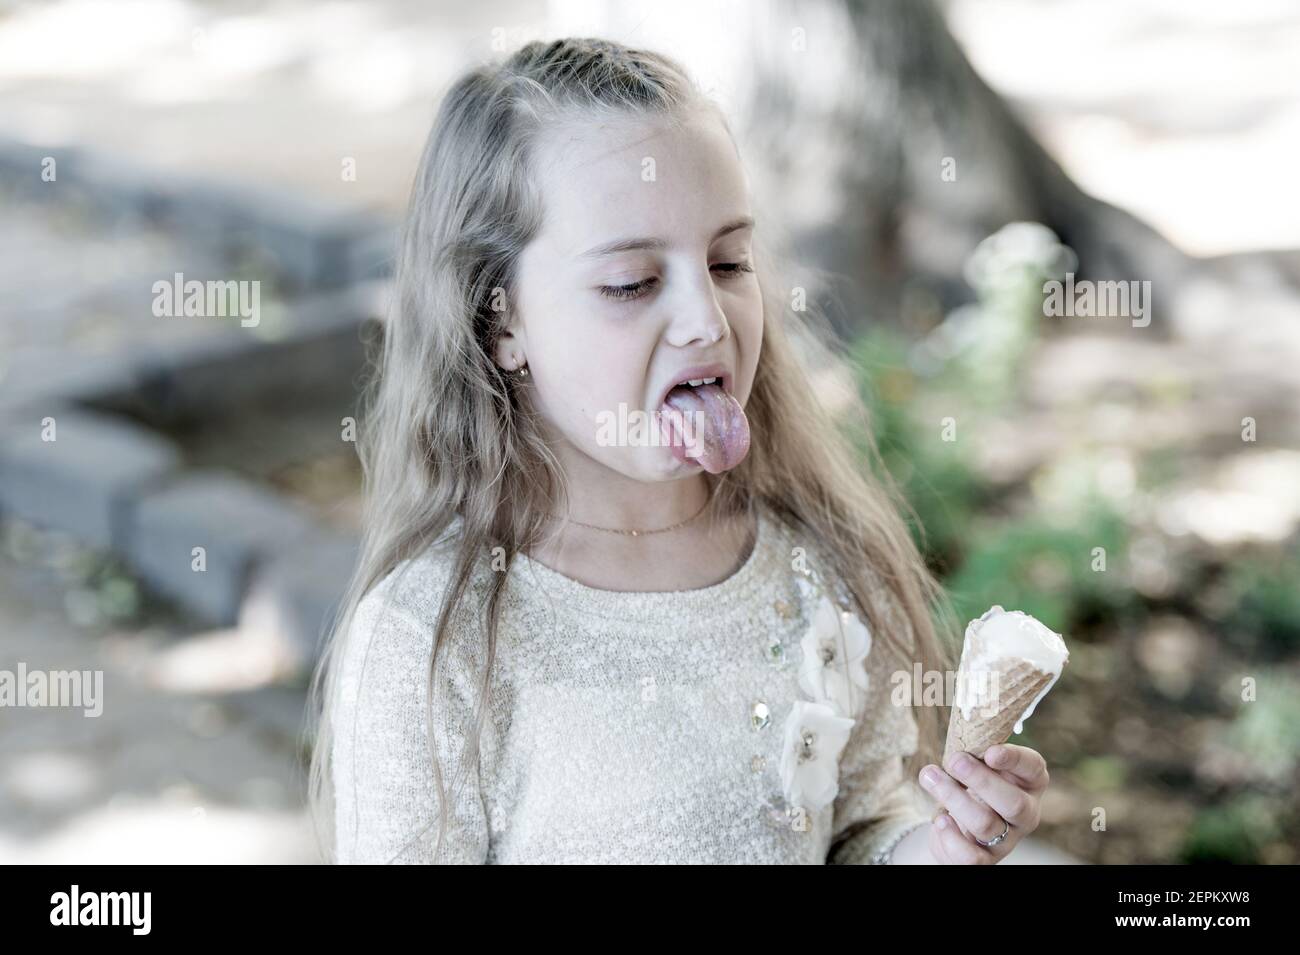 Kid girl with ice cream cone in hand. Summer treats concept. Sweet tooth girl child with white ice cream in waffle cone. Girl sweet tooth on disgusted face eats ice cream, light background. Stock Photo